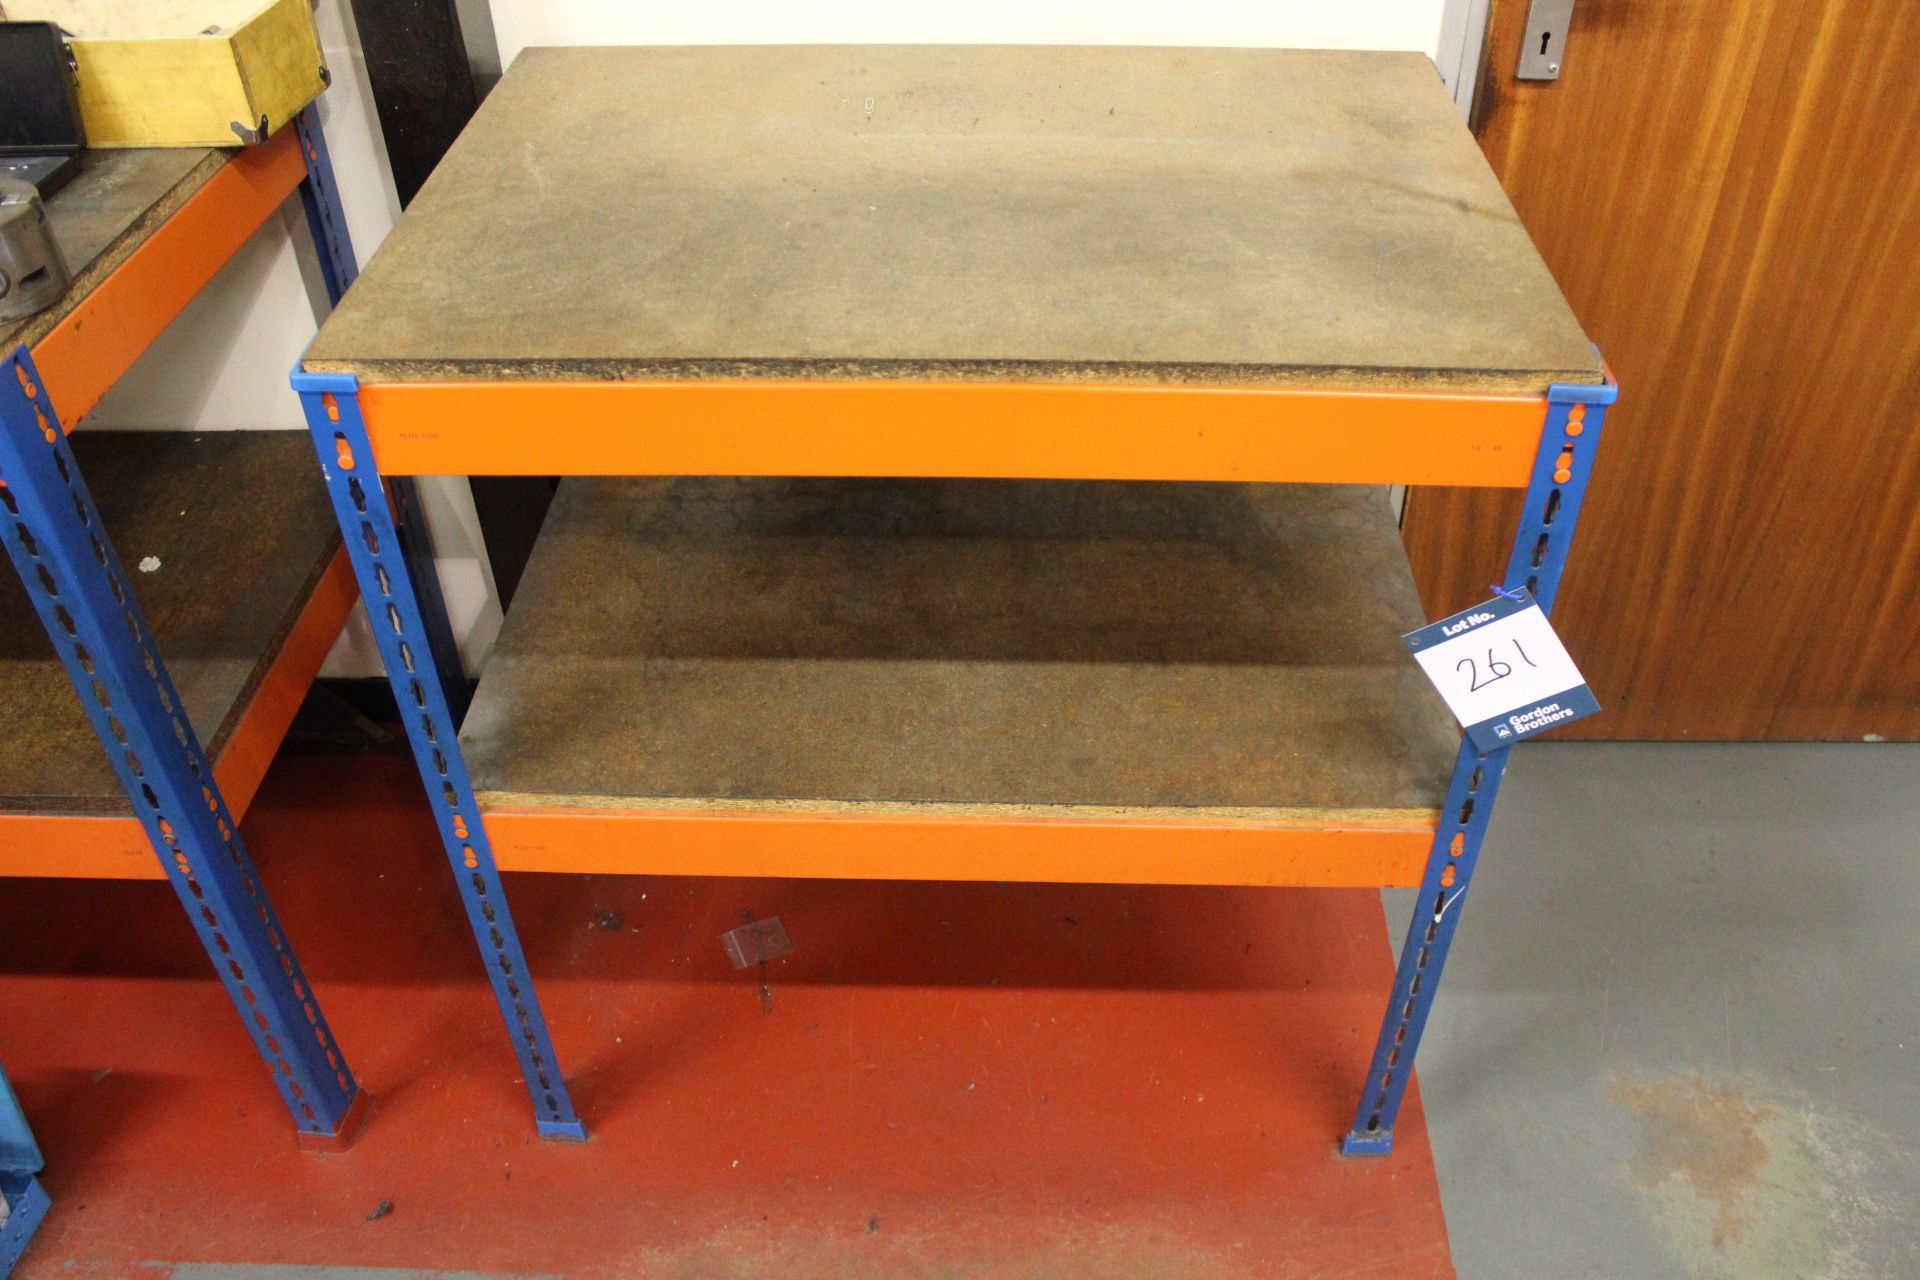 Metal Point FB 36 racking based workbench, size: 885mm x 610mm x 930mm (CONTENTS NOT INCLUDED)